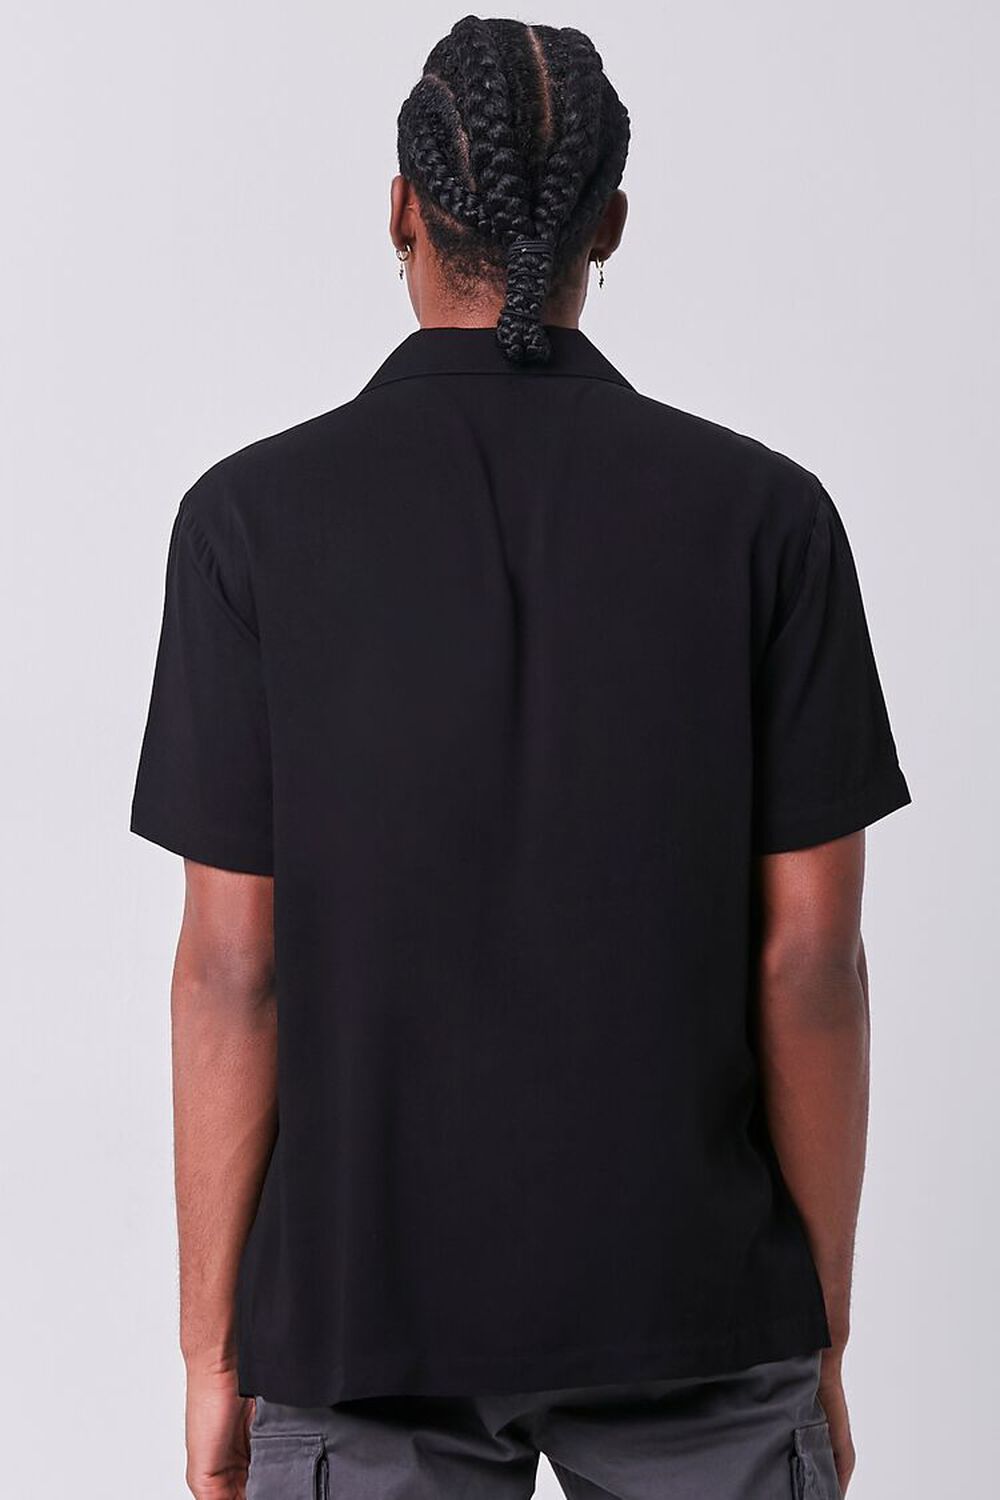 BLACK/MULTI Classic Fit Game Over Graphic Shirt, image 3